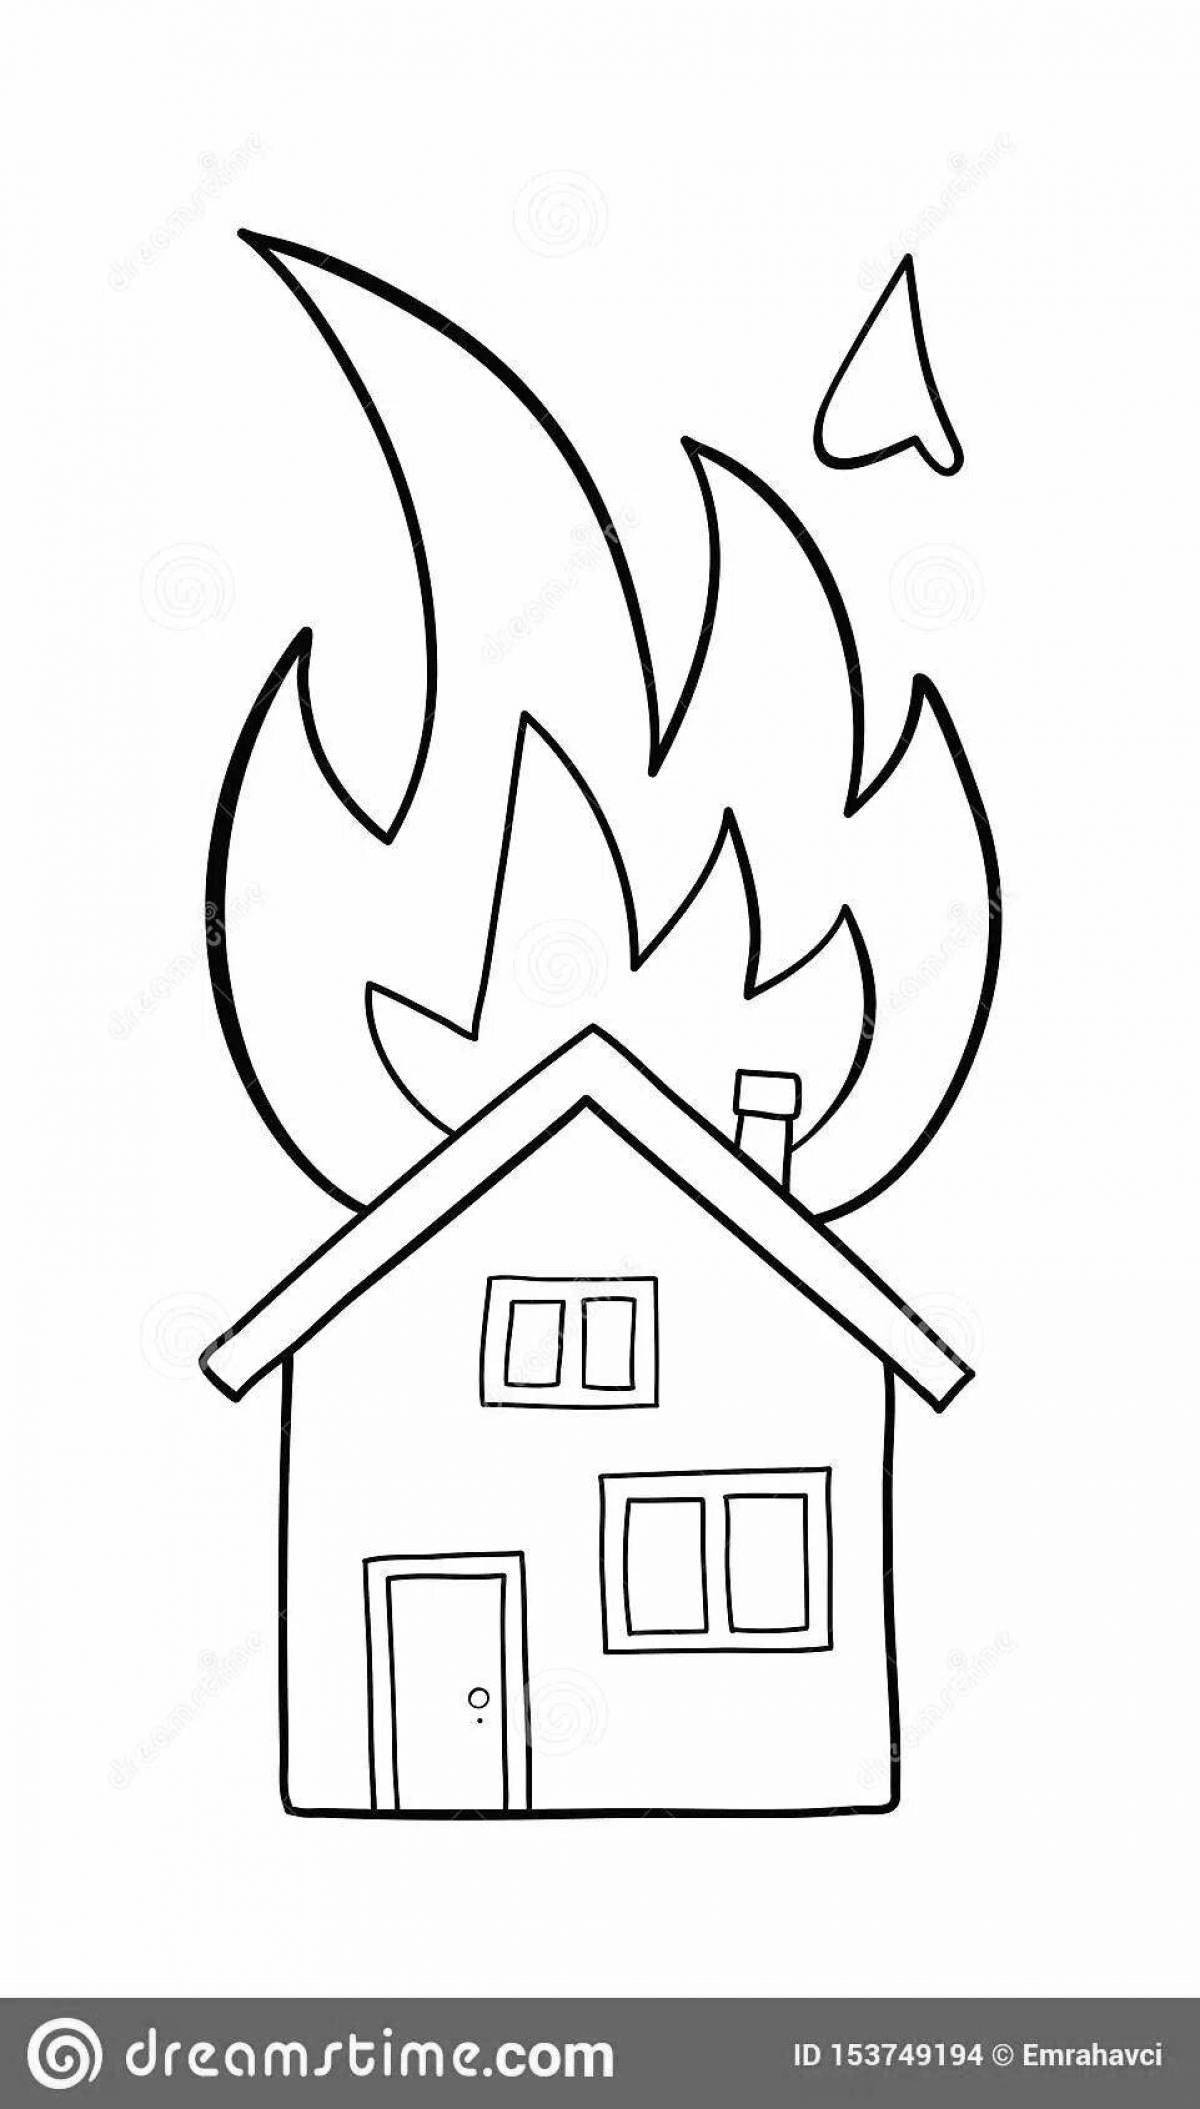 Fairytale coloring house on fire for kids